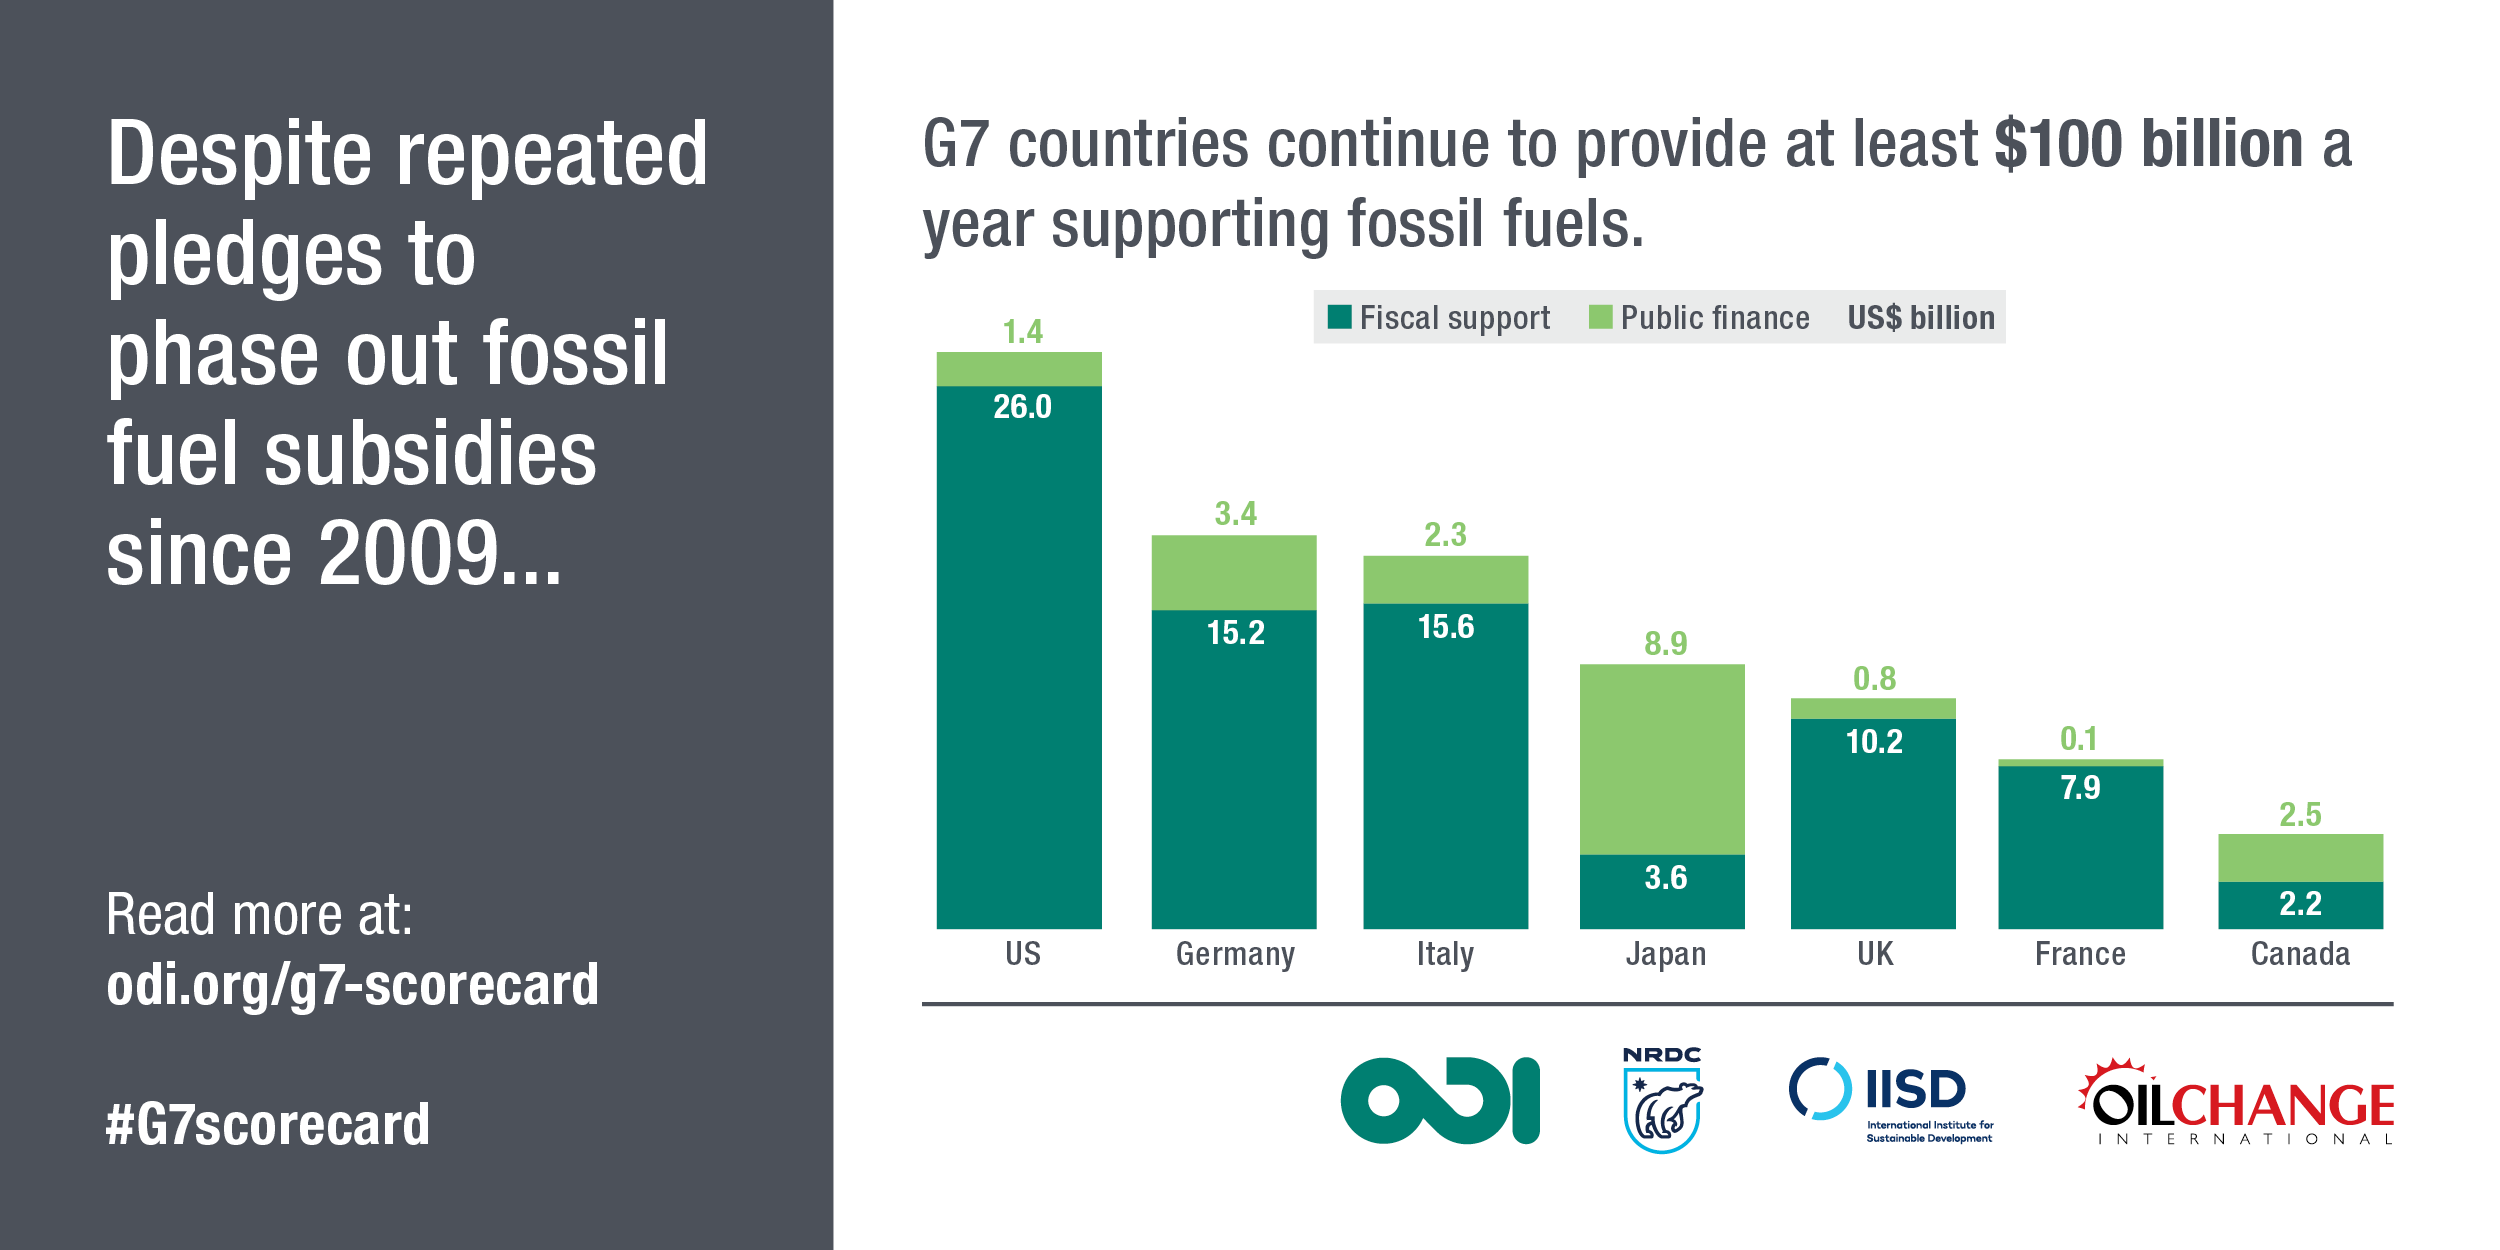 Despite repeated pledges to phase out fossil fuel subsidies since 2009, G7 countries continue to provide at least $100 billion a year supporting fossil fuels. Image: ODI